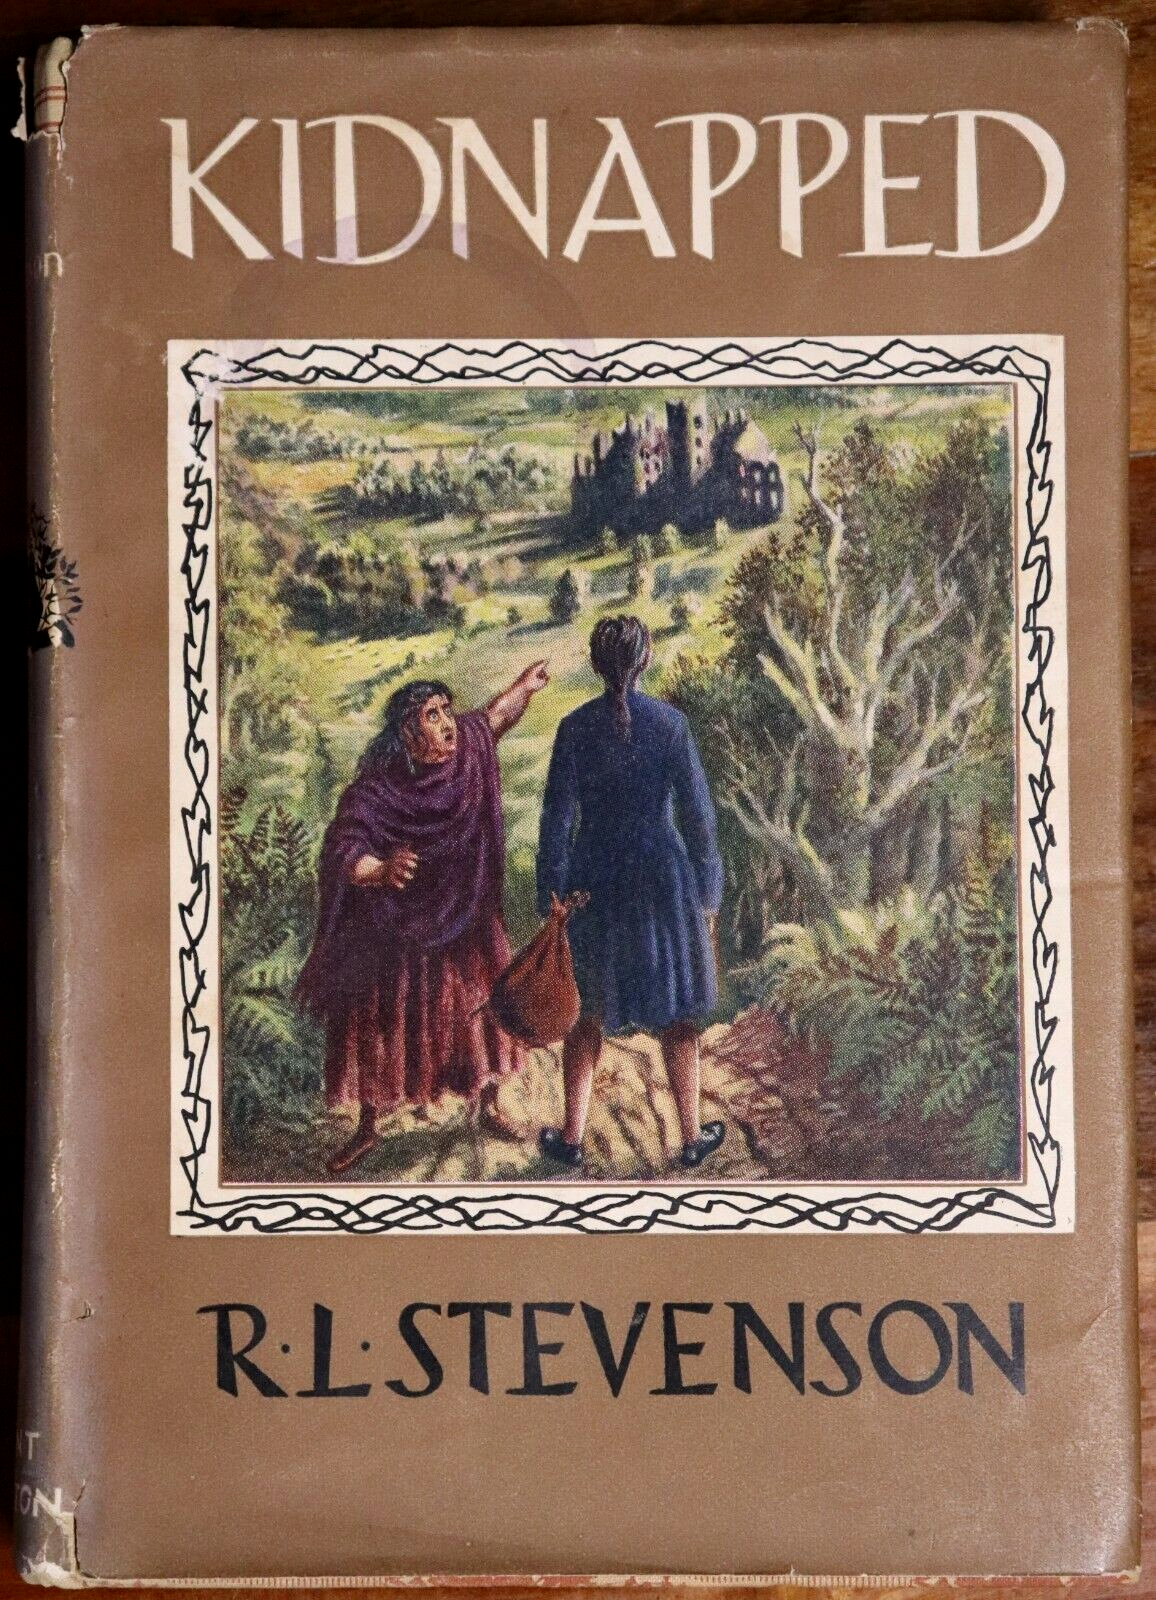 Kidnapped by Robert Louis Stevenson - 1960 - Illustrated Classic Literature Book